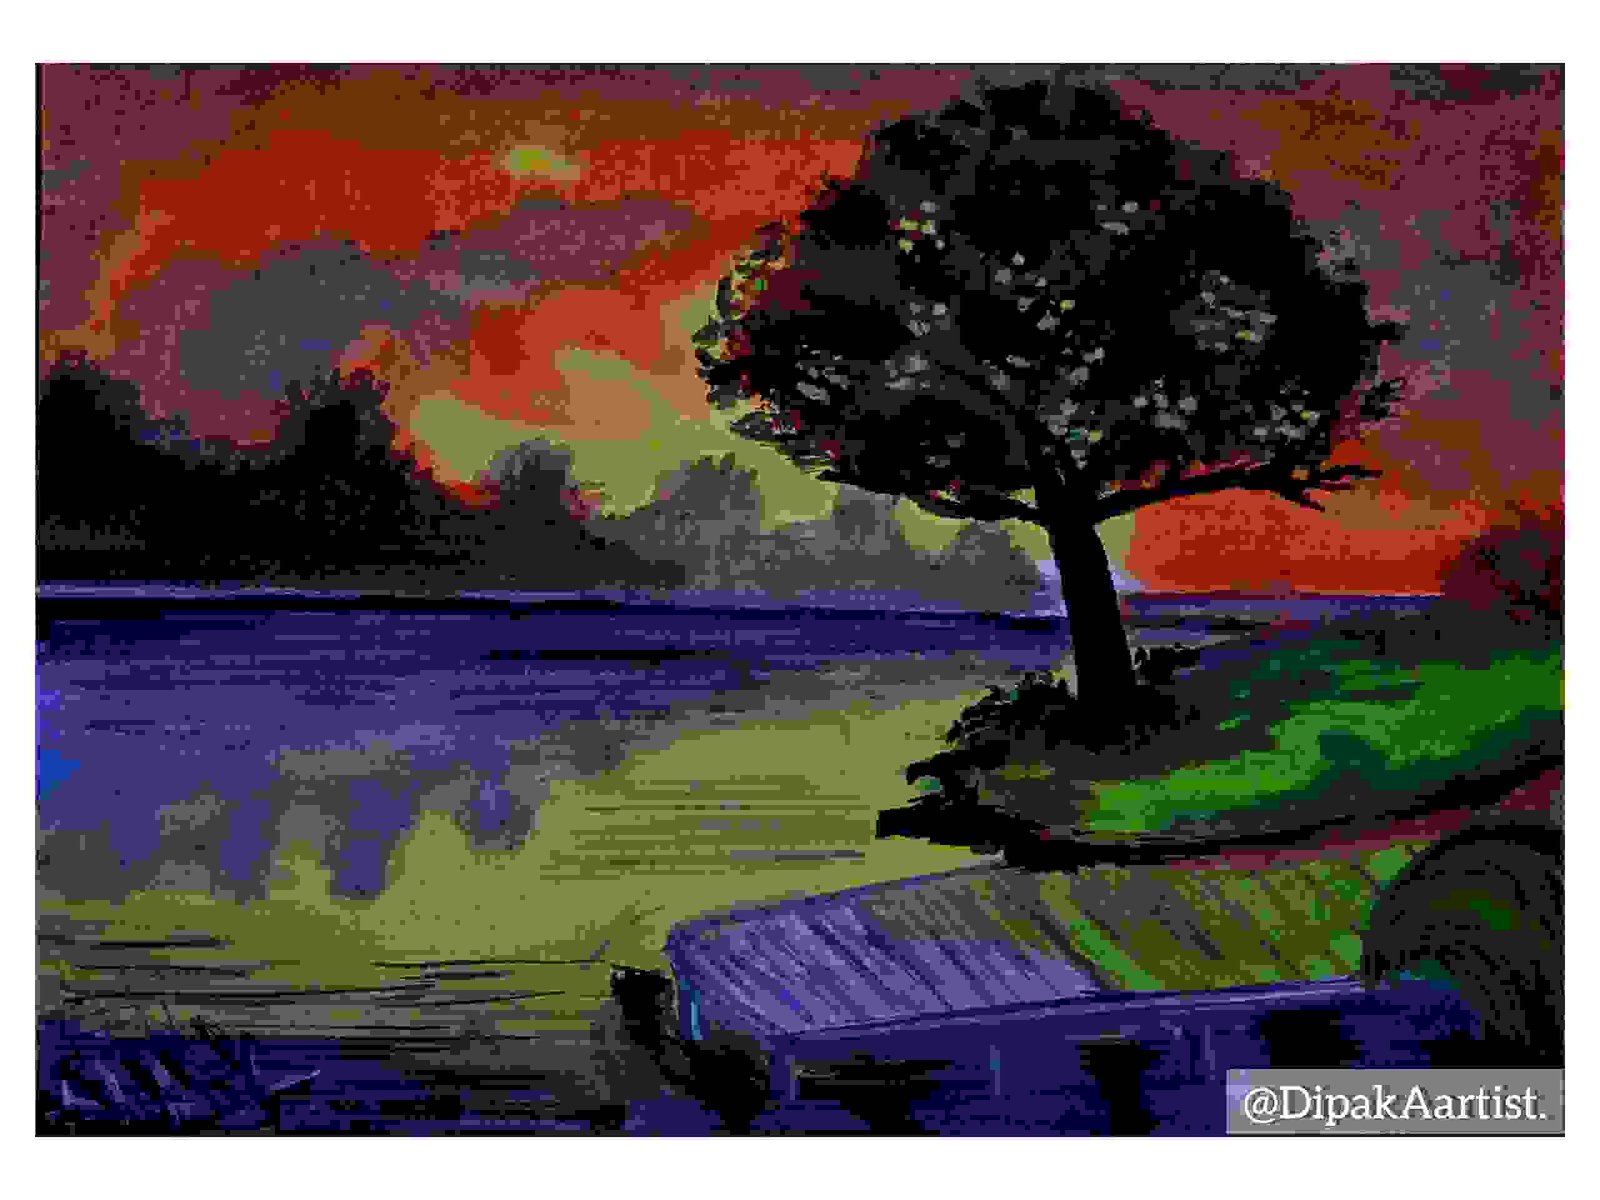 Painting Of The Beautiful Evening Scenery Painting Done